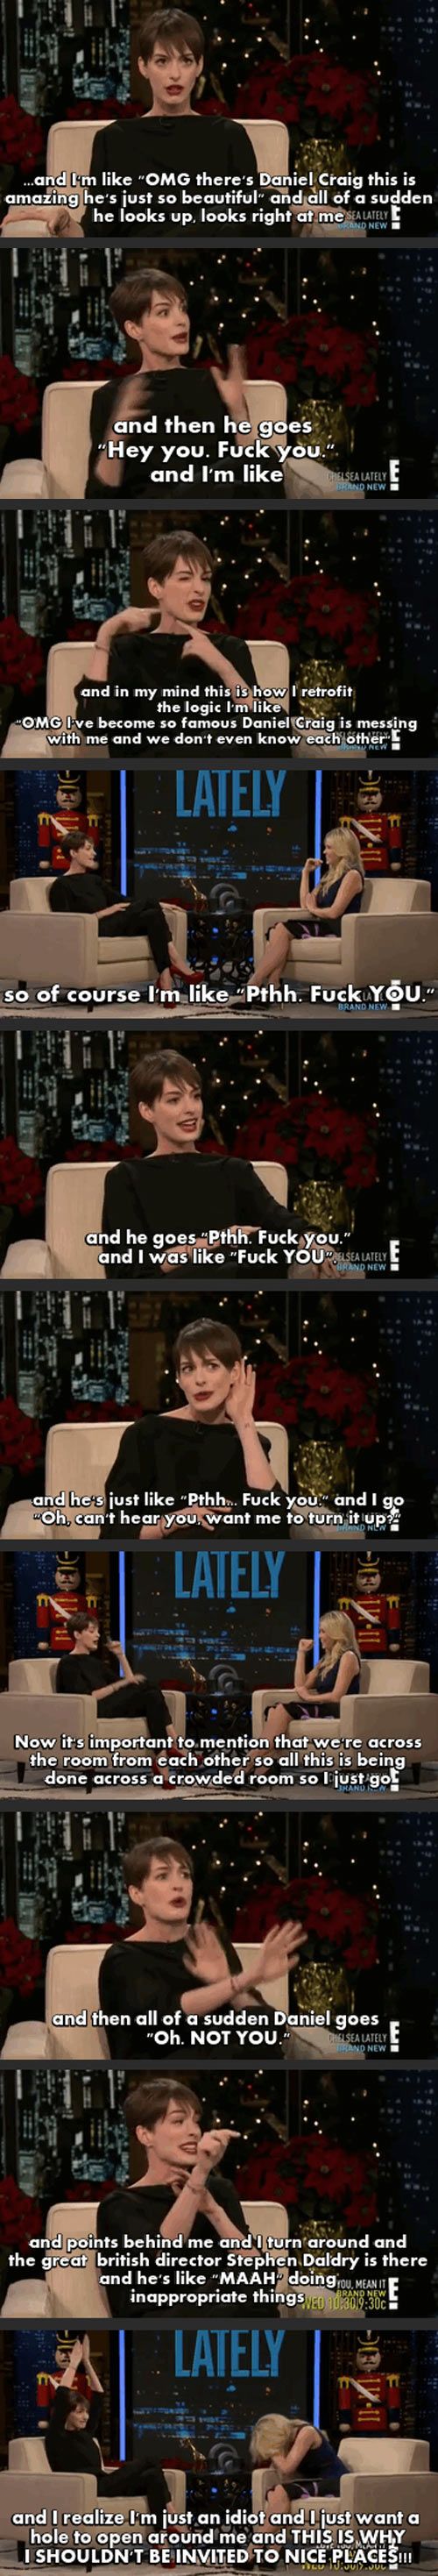 Anne Hathaway is just like us